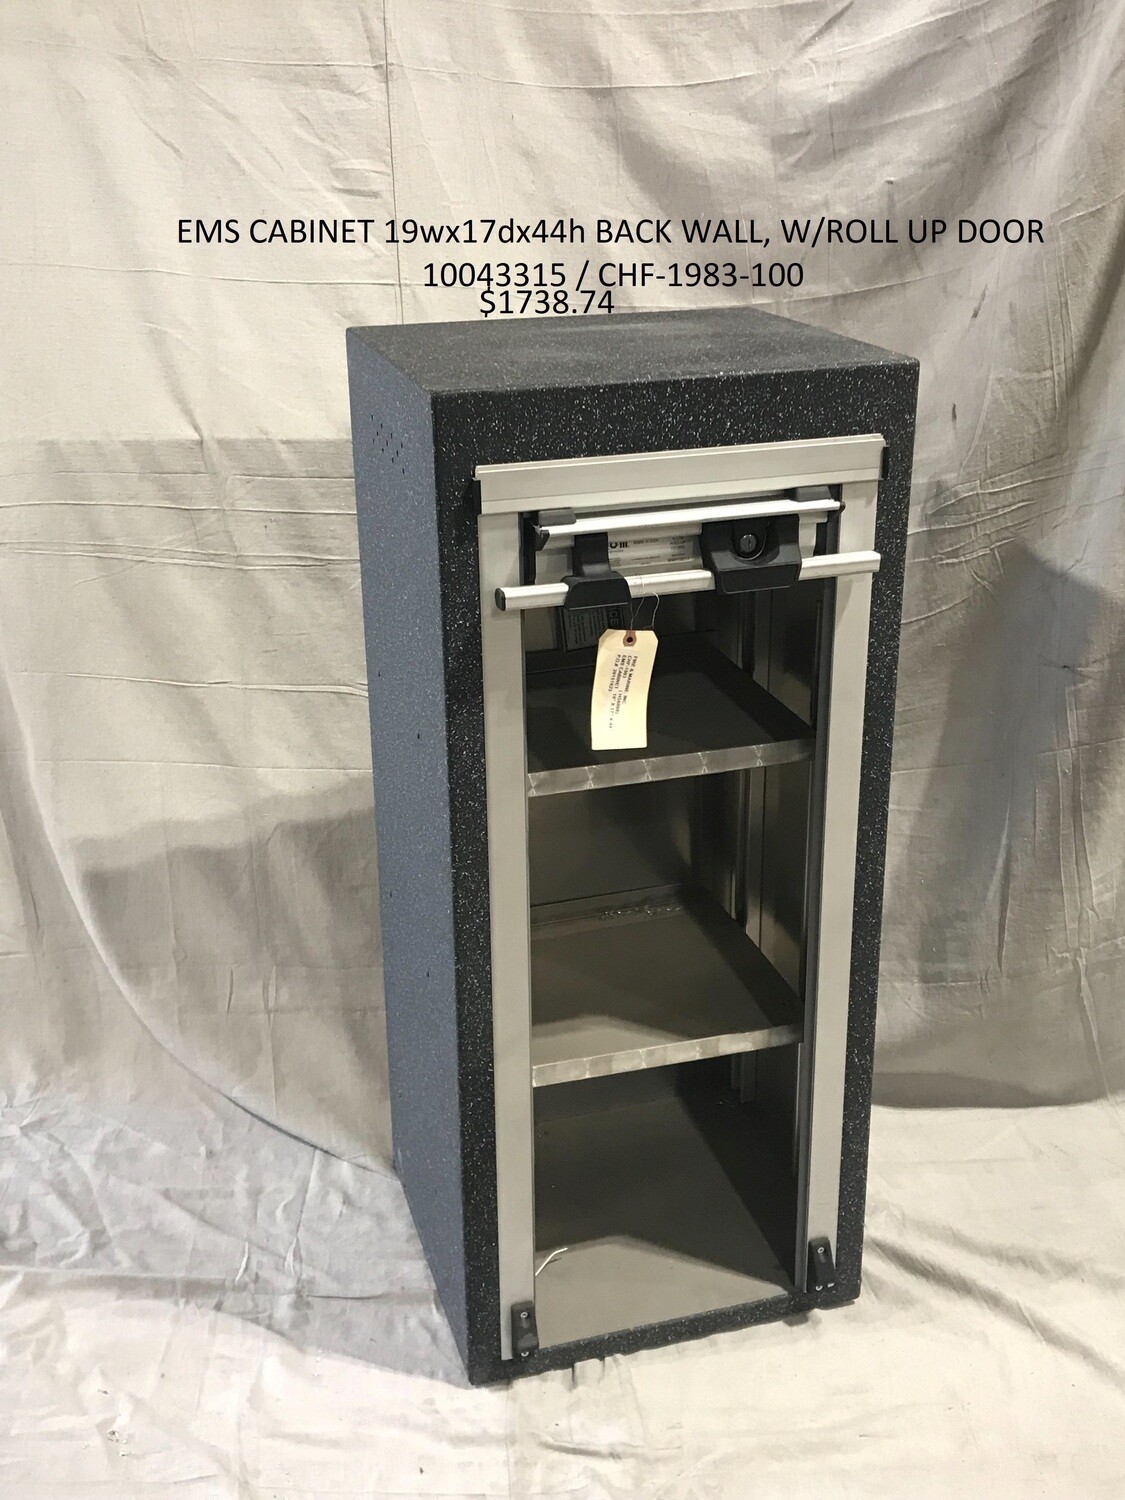 CABINET - EMS Back Wall